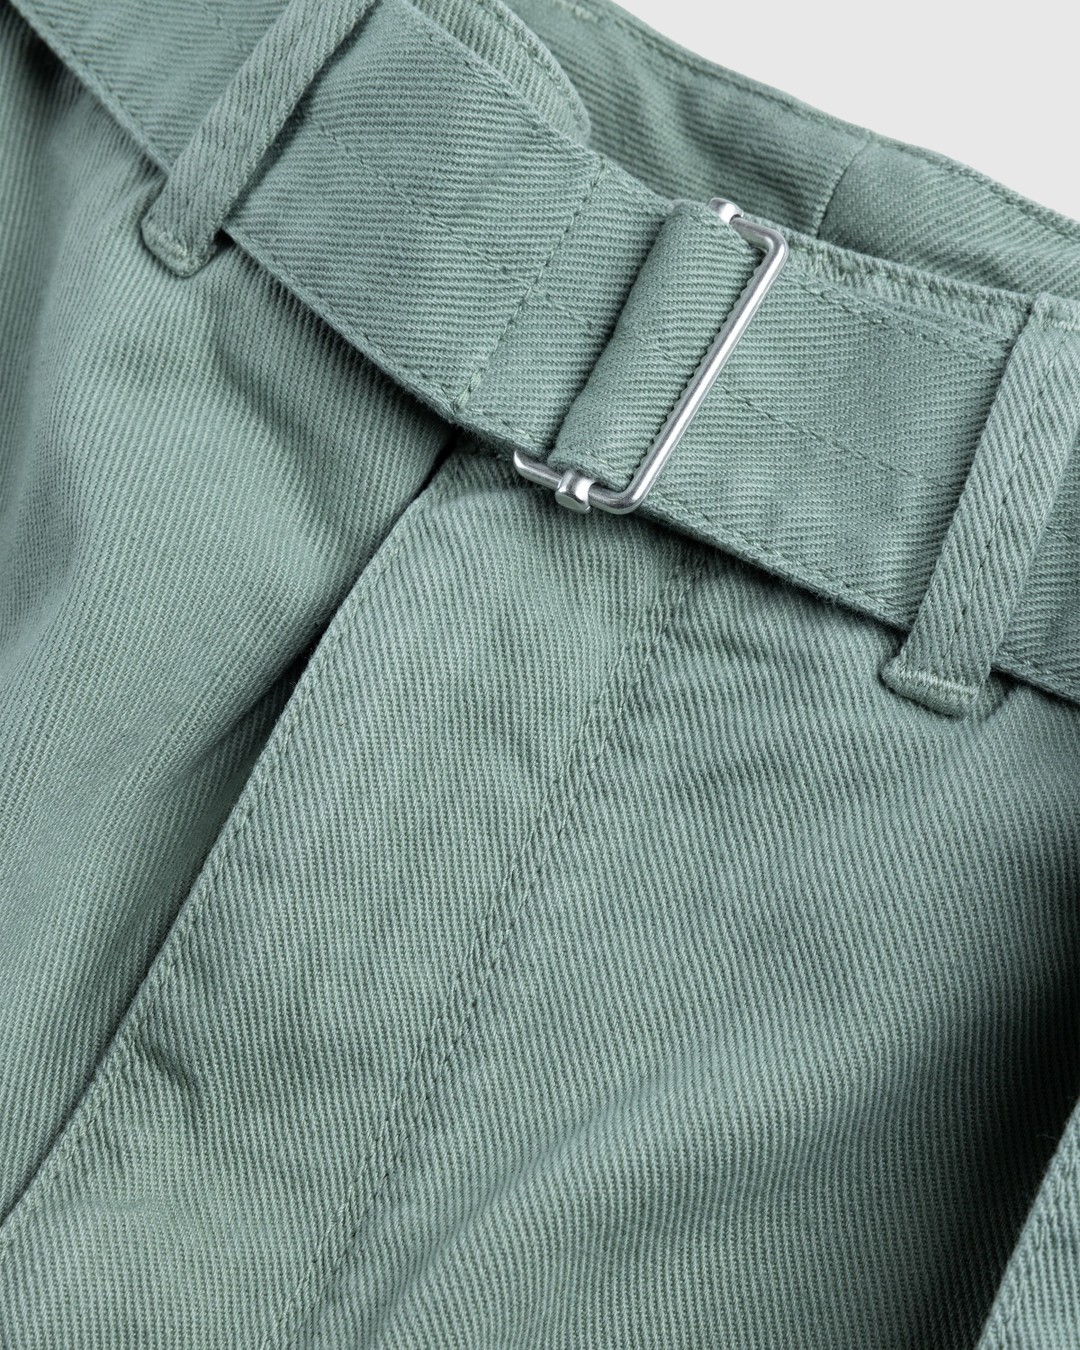 Lemaire – Military Pants Hedge Green